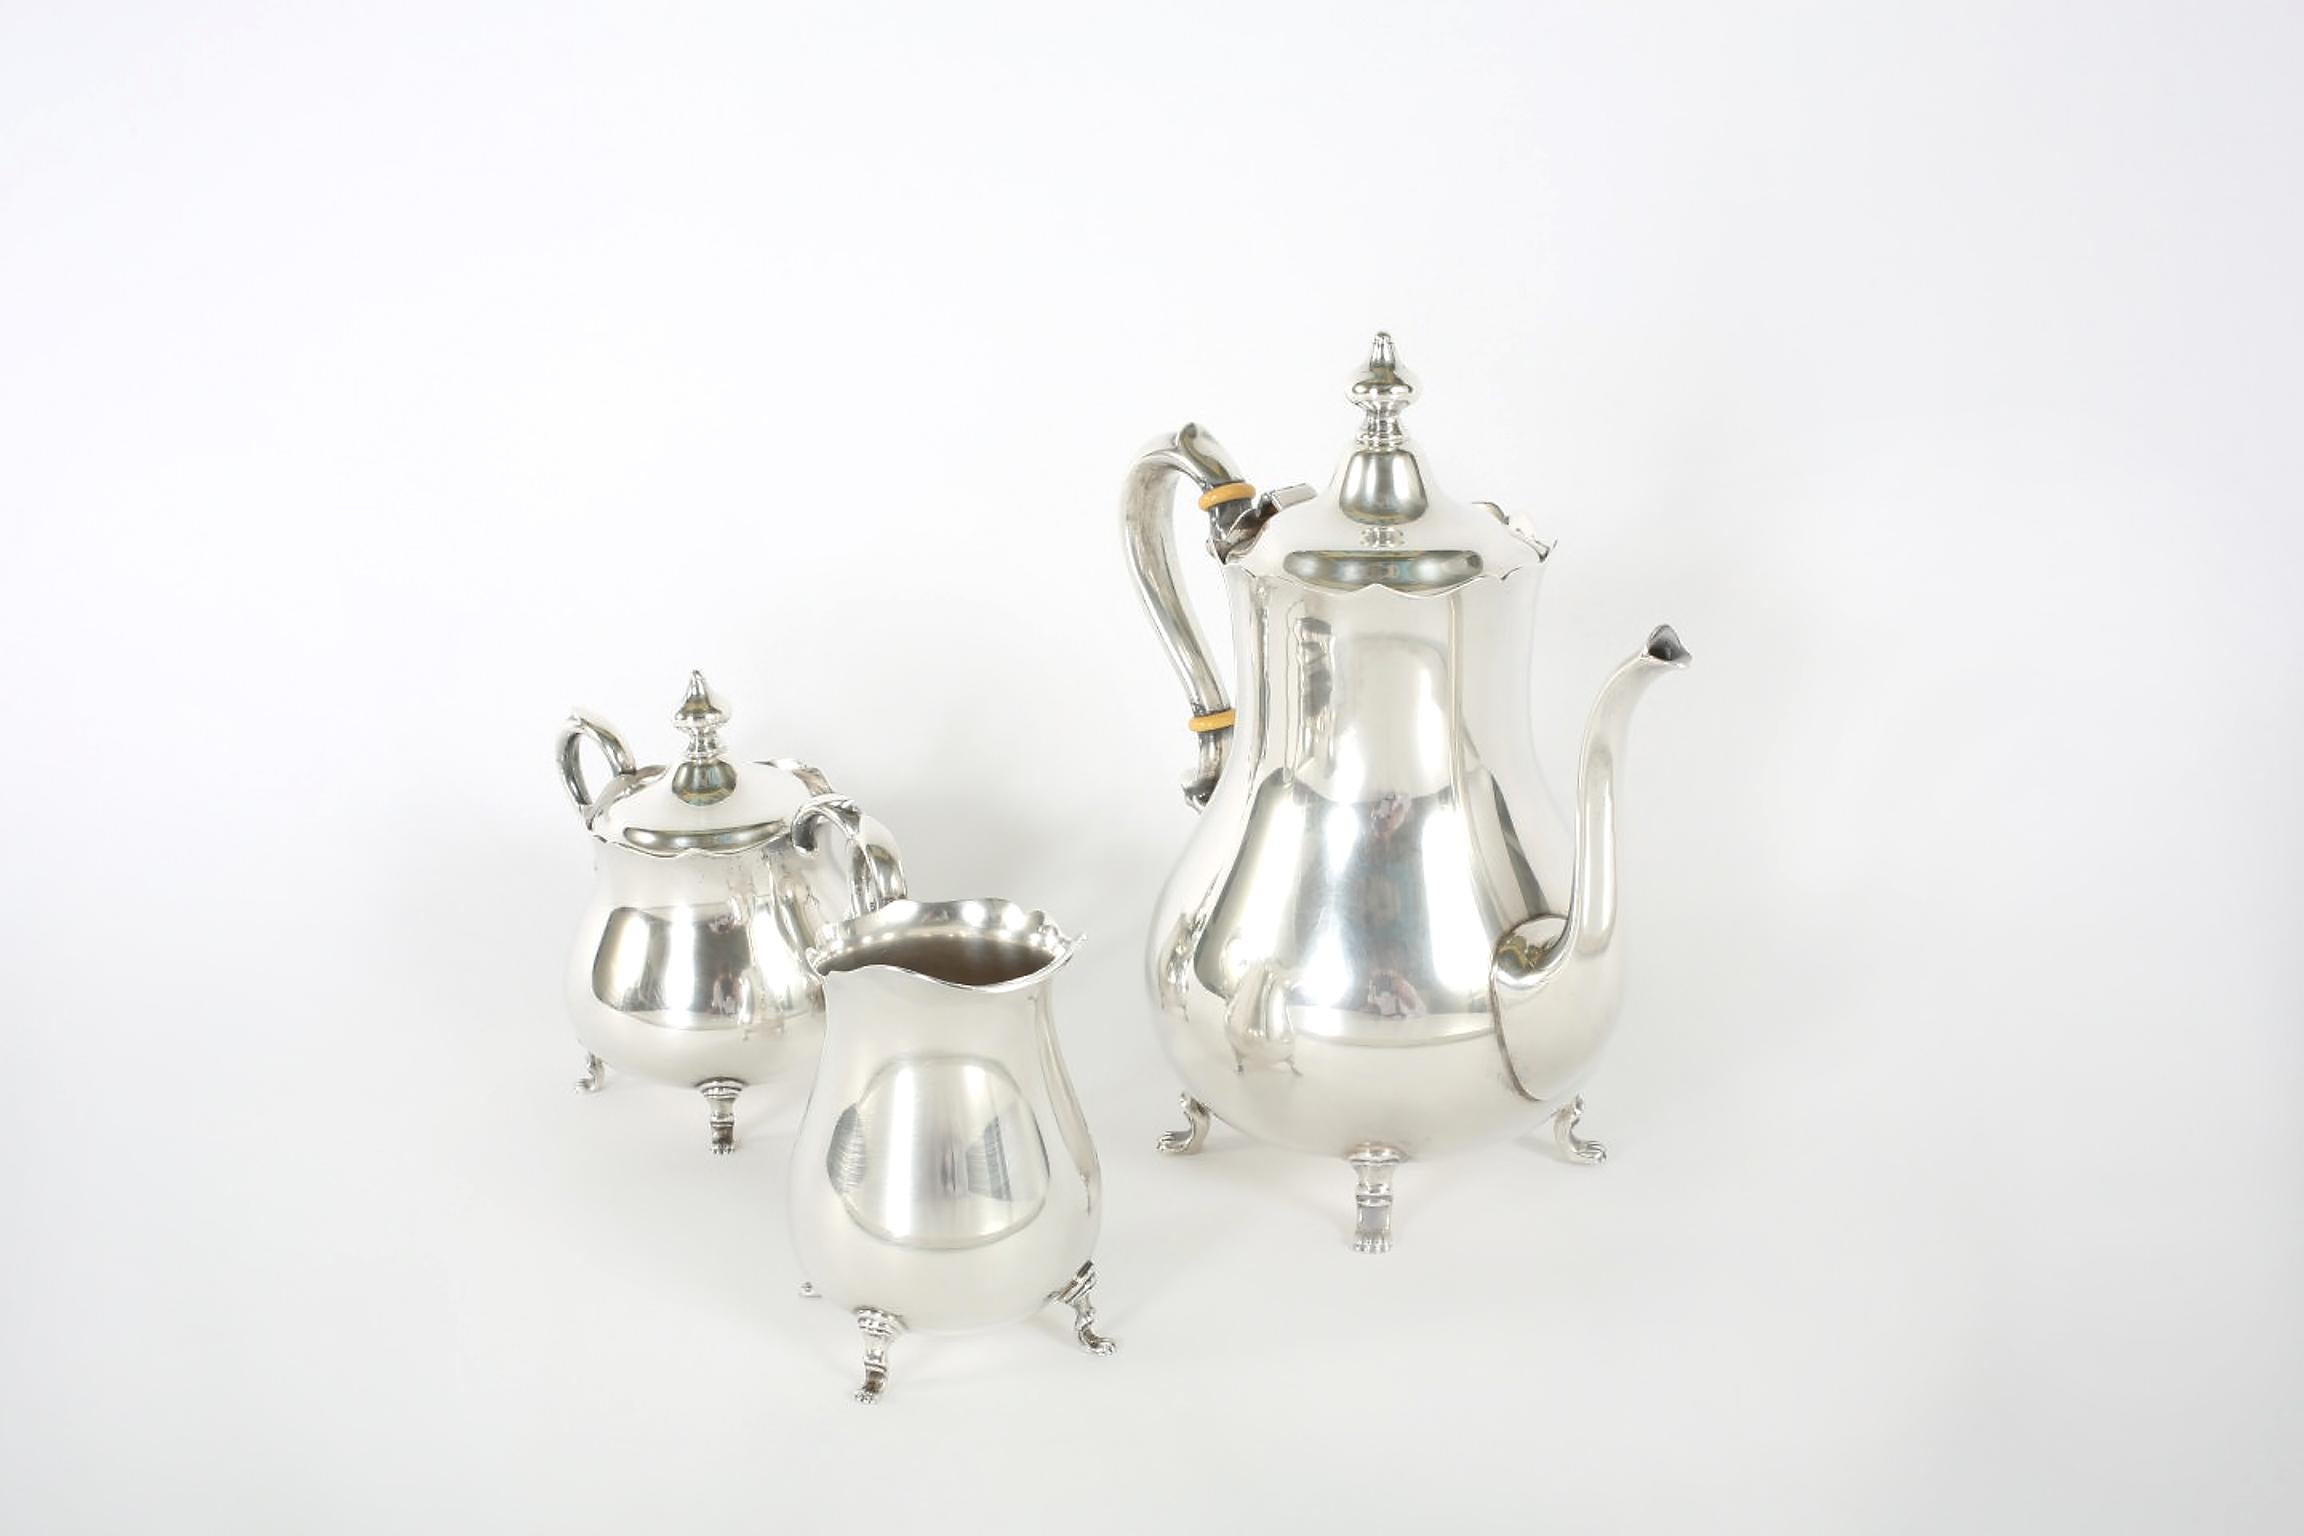 Mid-20th century Cartier sterling silver three-piece tea / coffee service with paw feet details. Each piece is in great vintage condition with wear appropriate to age / use. Maker's mark undersigned. Measures: Tea / coffee pot is about 9